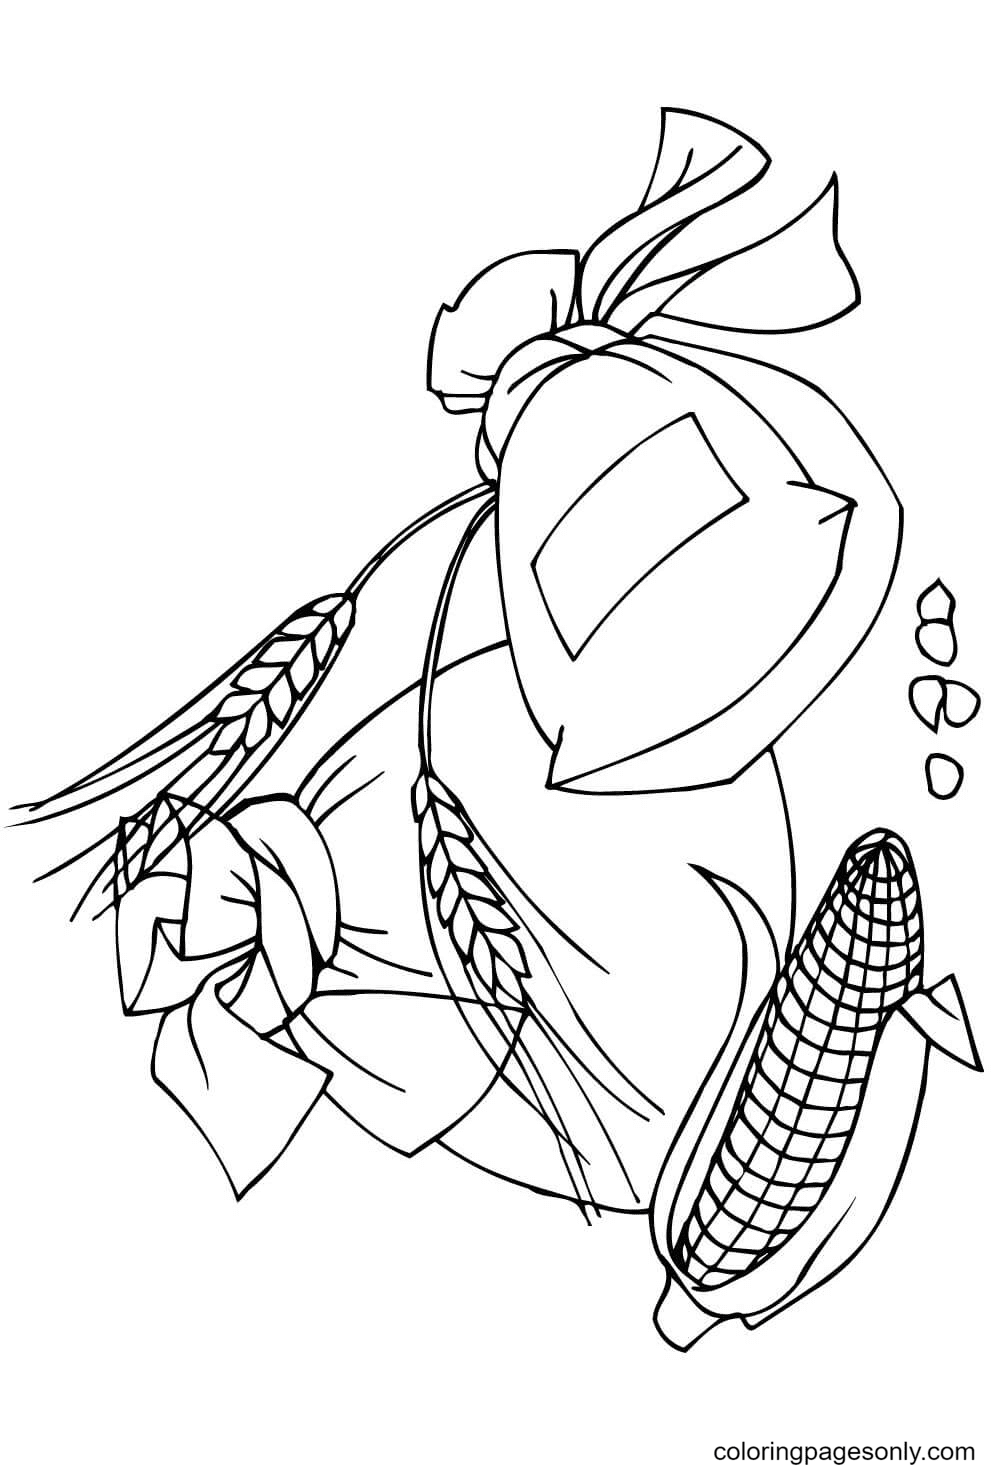 Spikelets Corncob and Flour Bags Coloring Pages